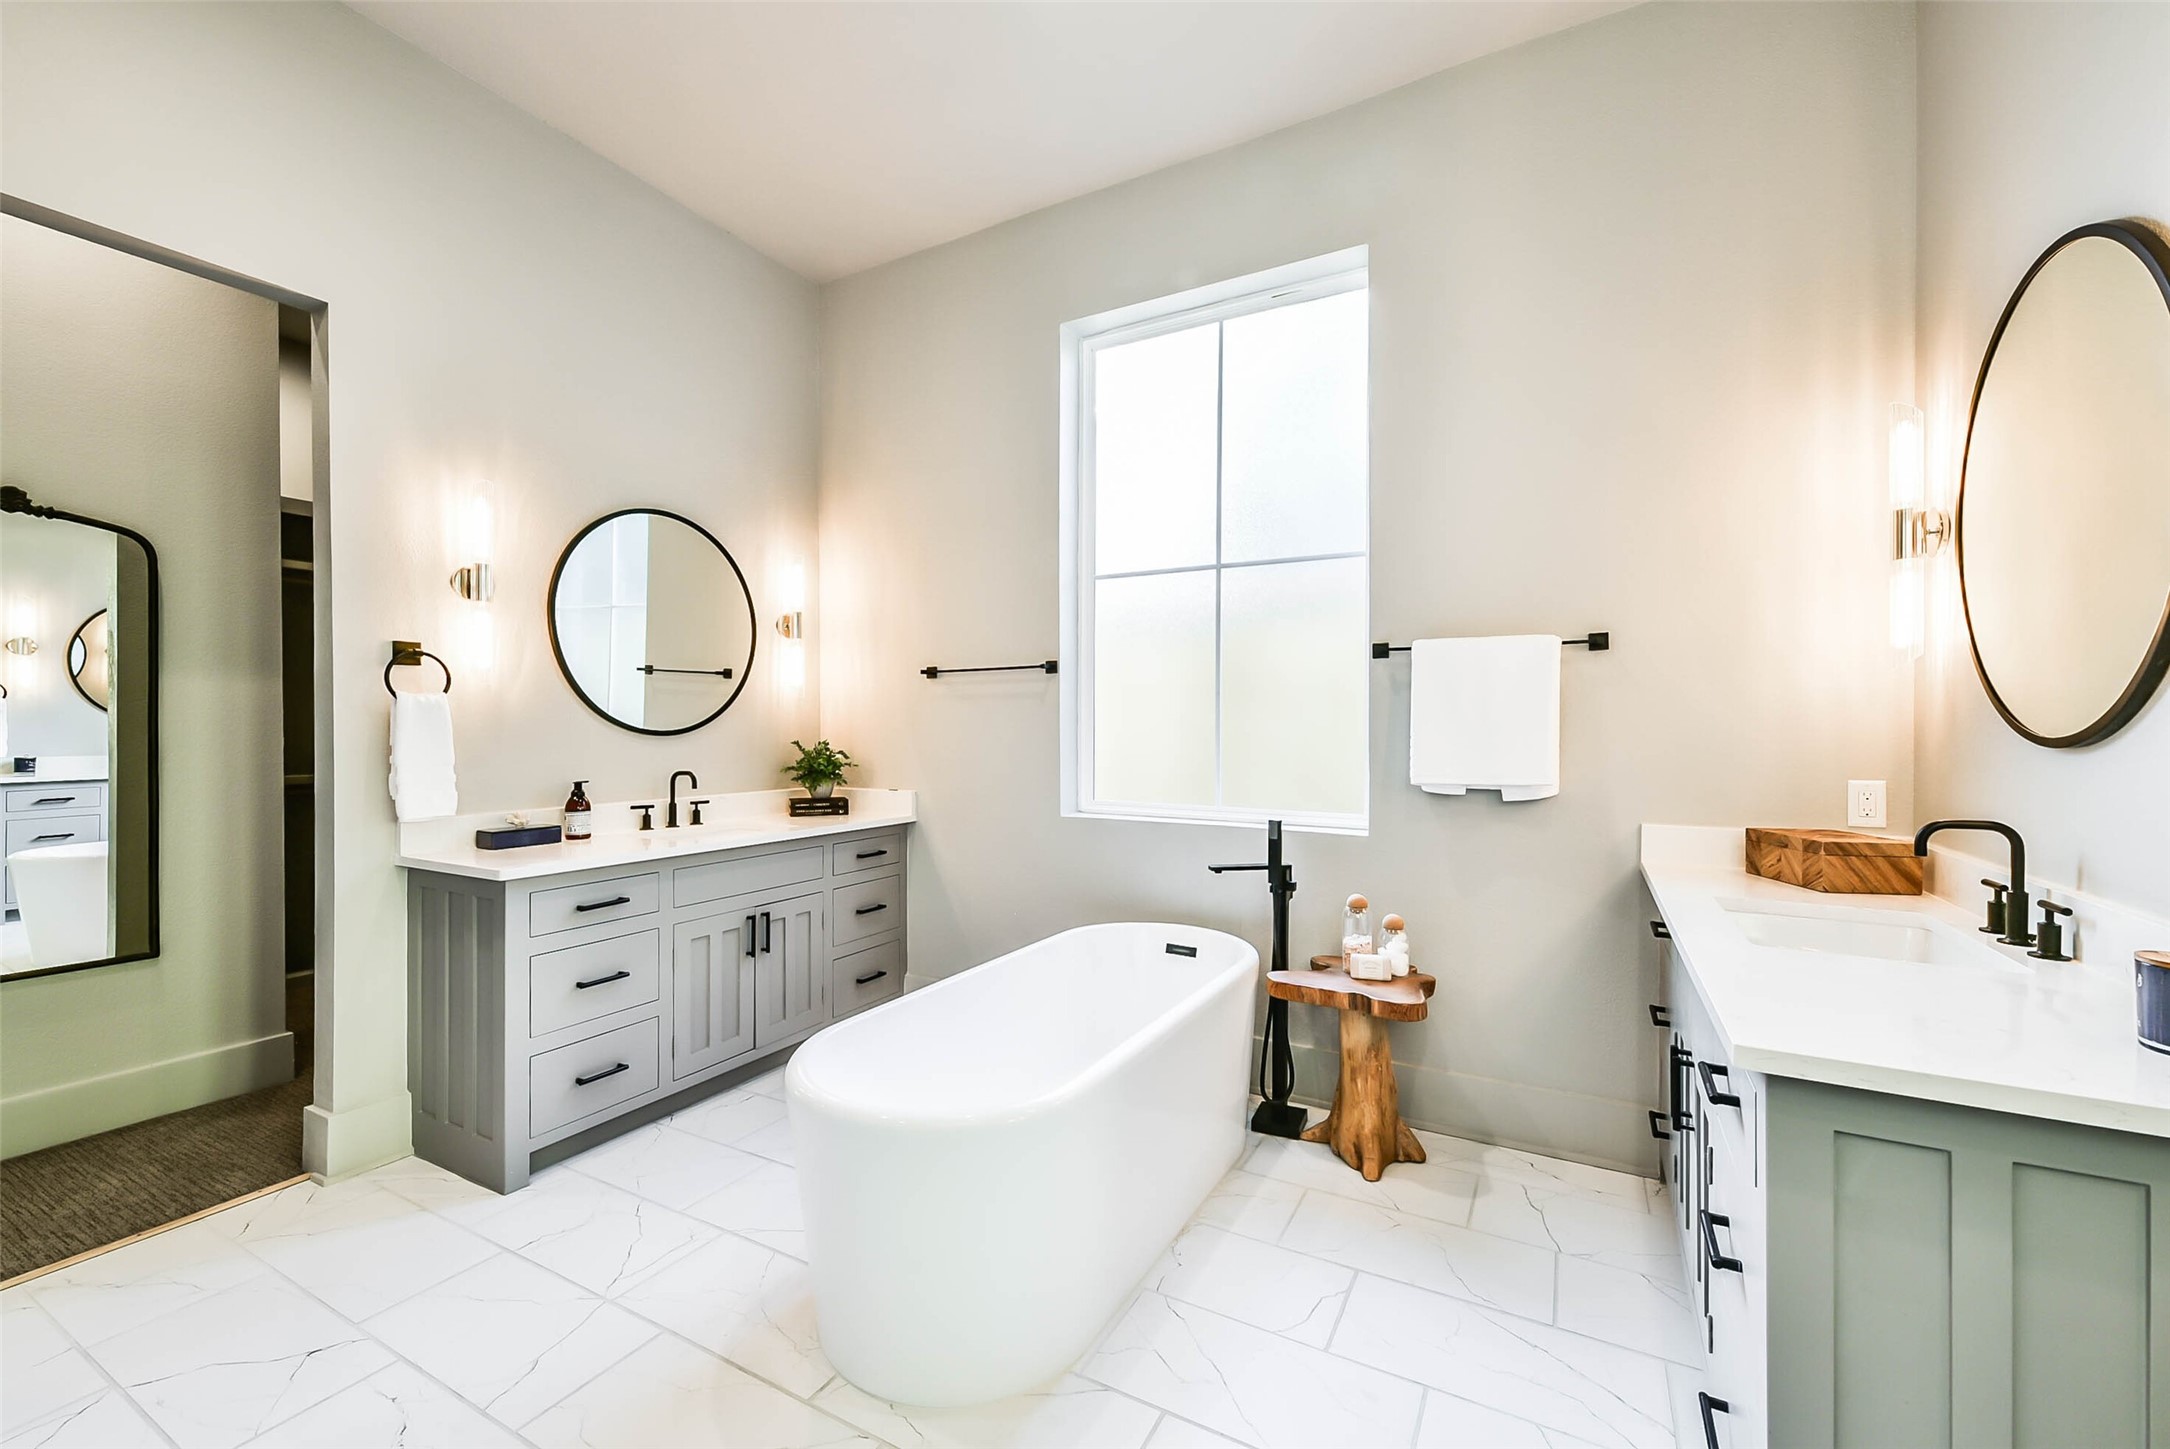 Rest and relax in your luxurious soaking tub. Double vanities allow for each owner to have their own personal space.